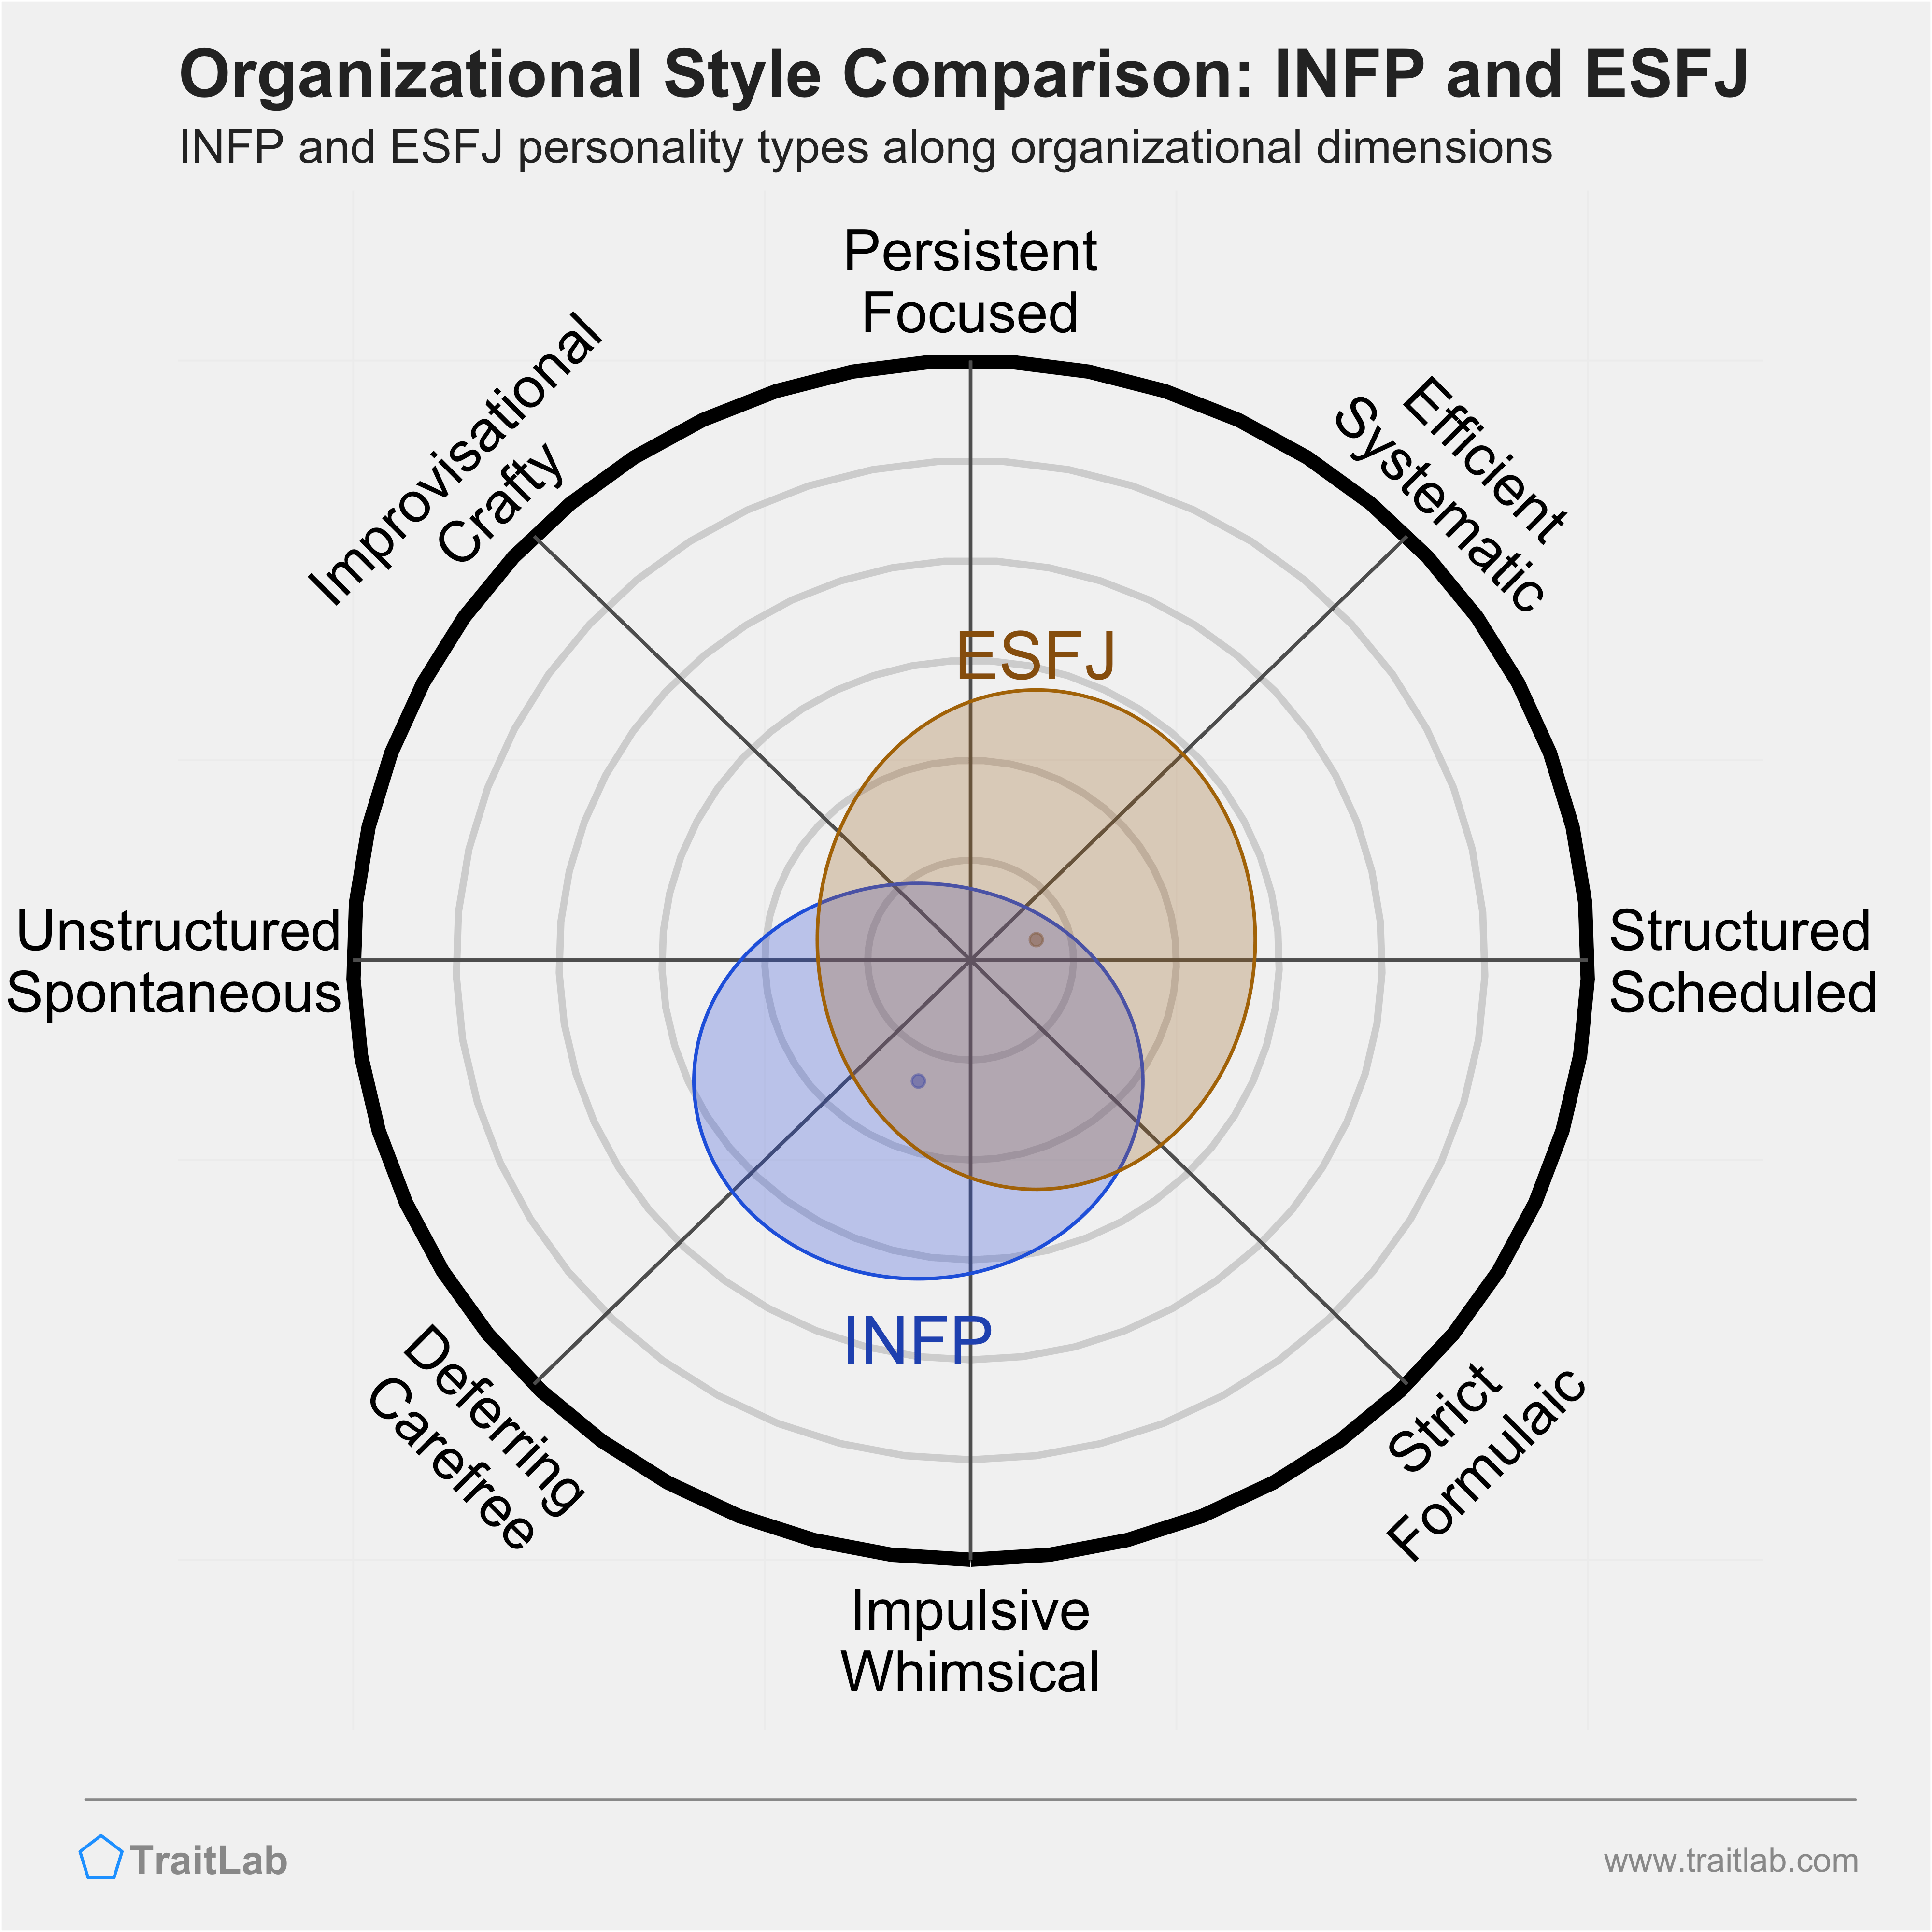 INFP and ESFJ comparison across organizational dimensions